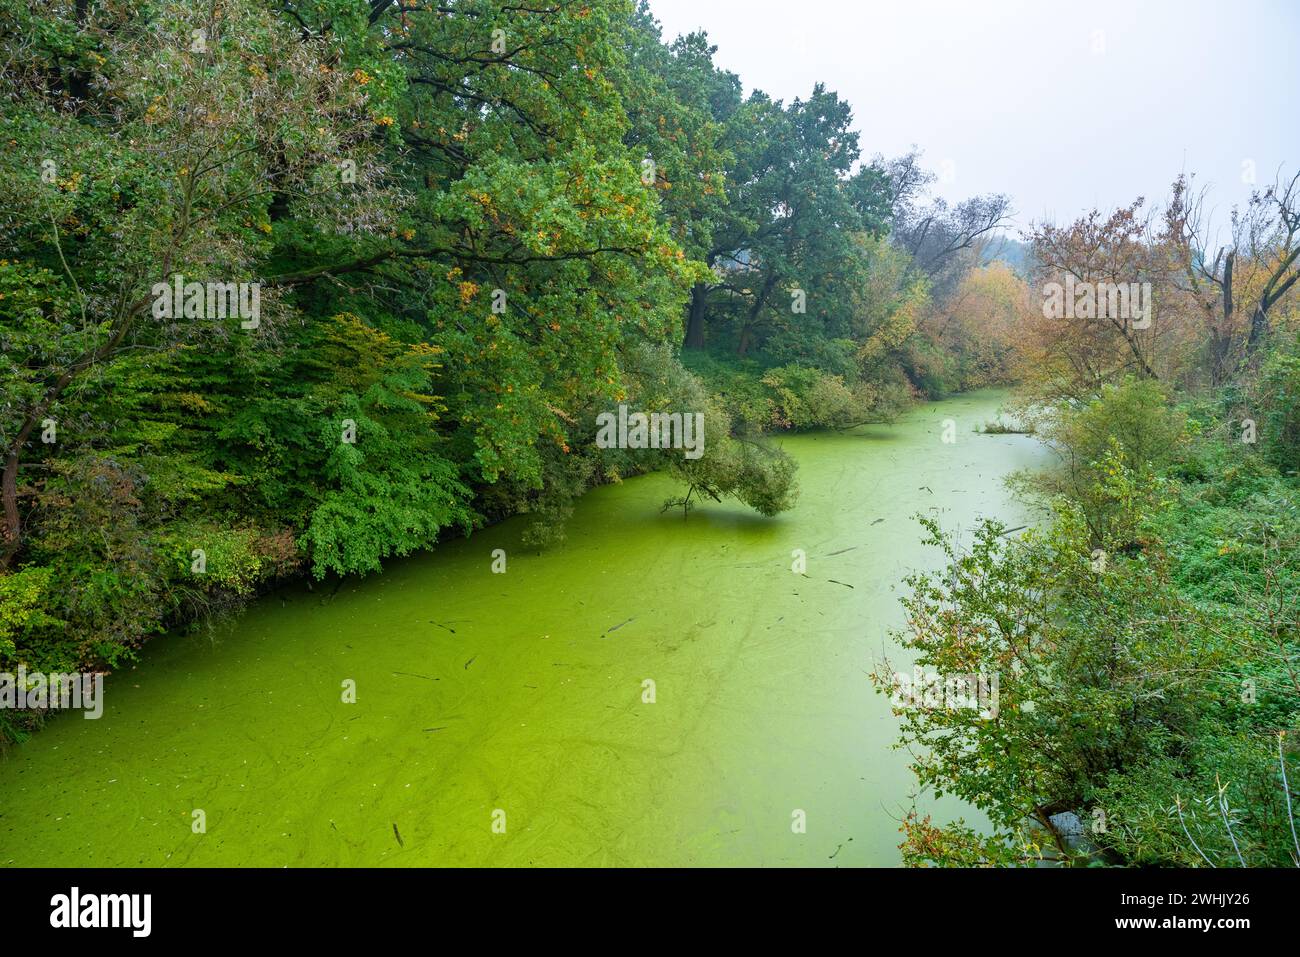 A swamp surrounded by lush green trees Stock Photo